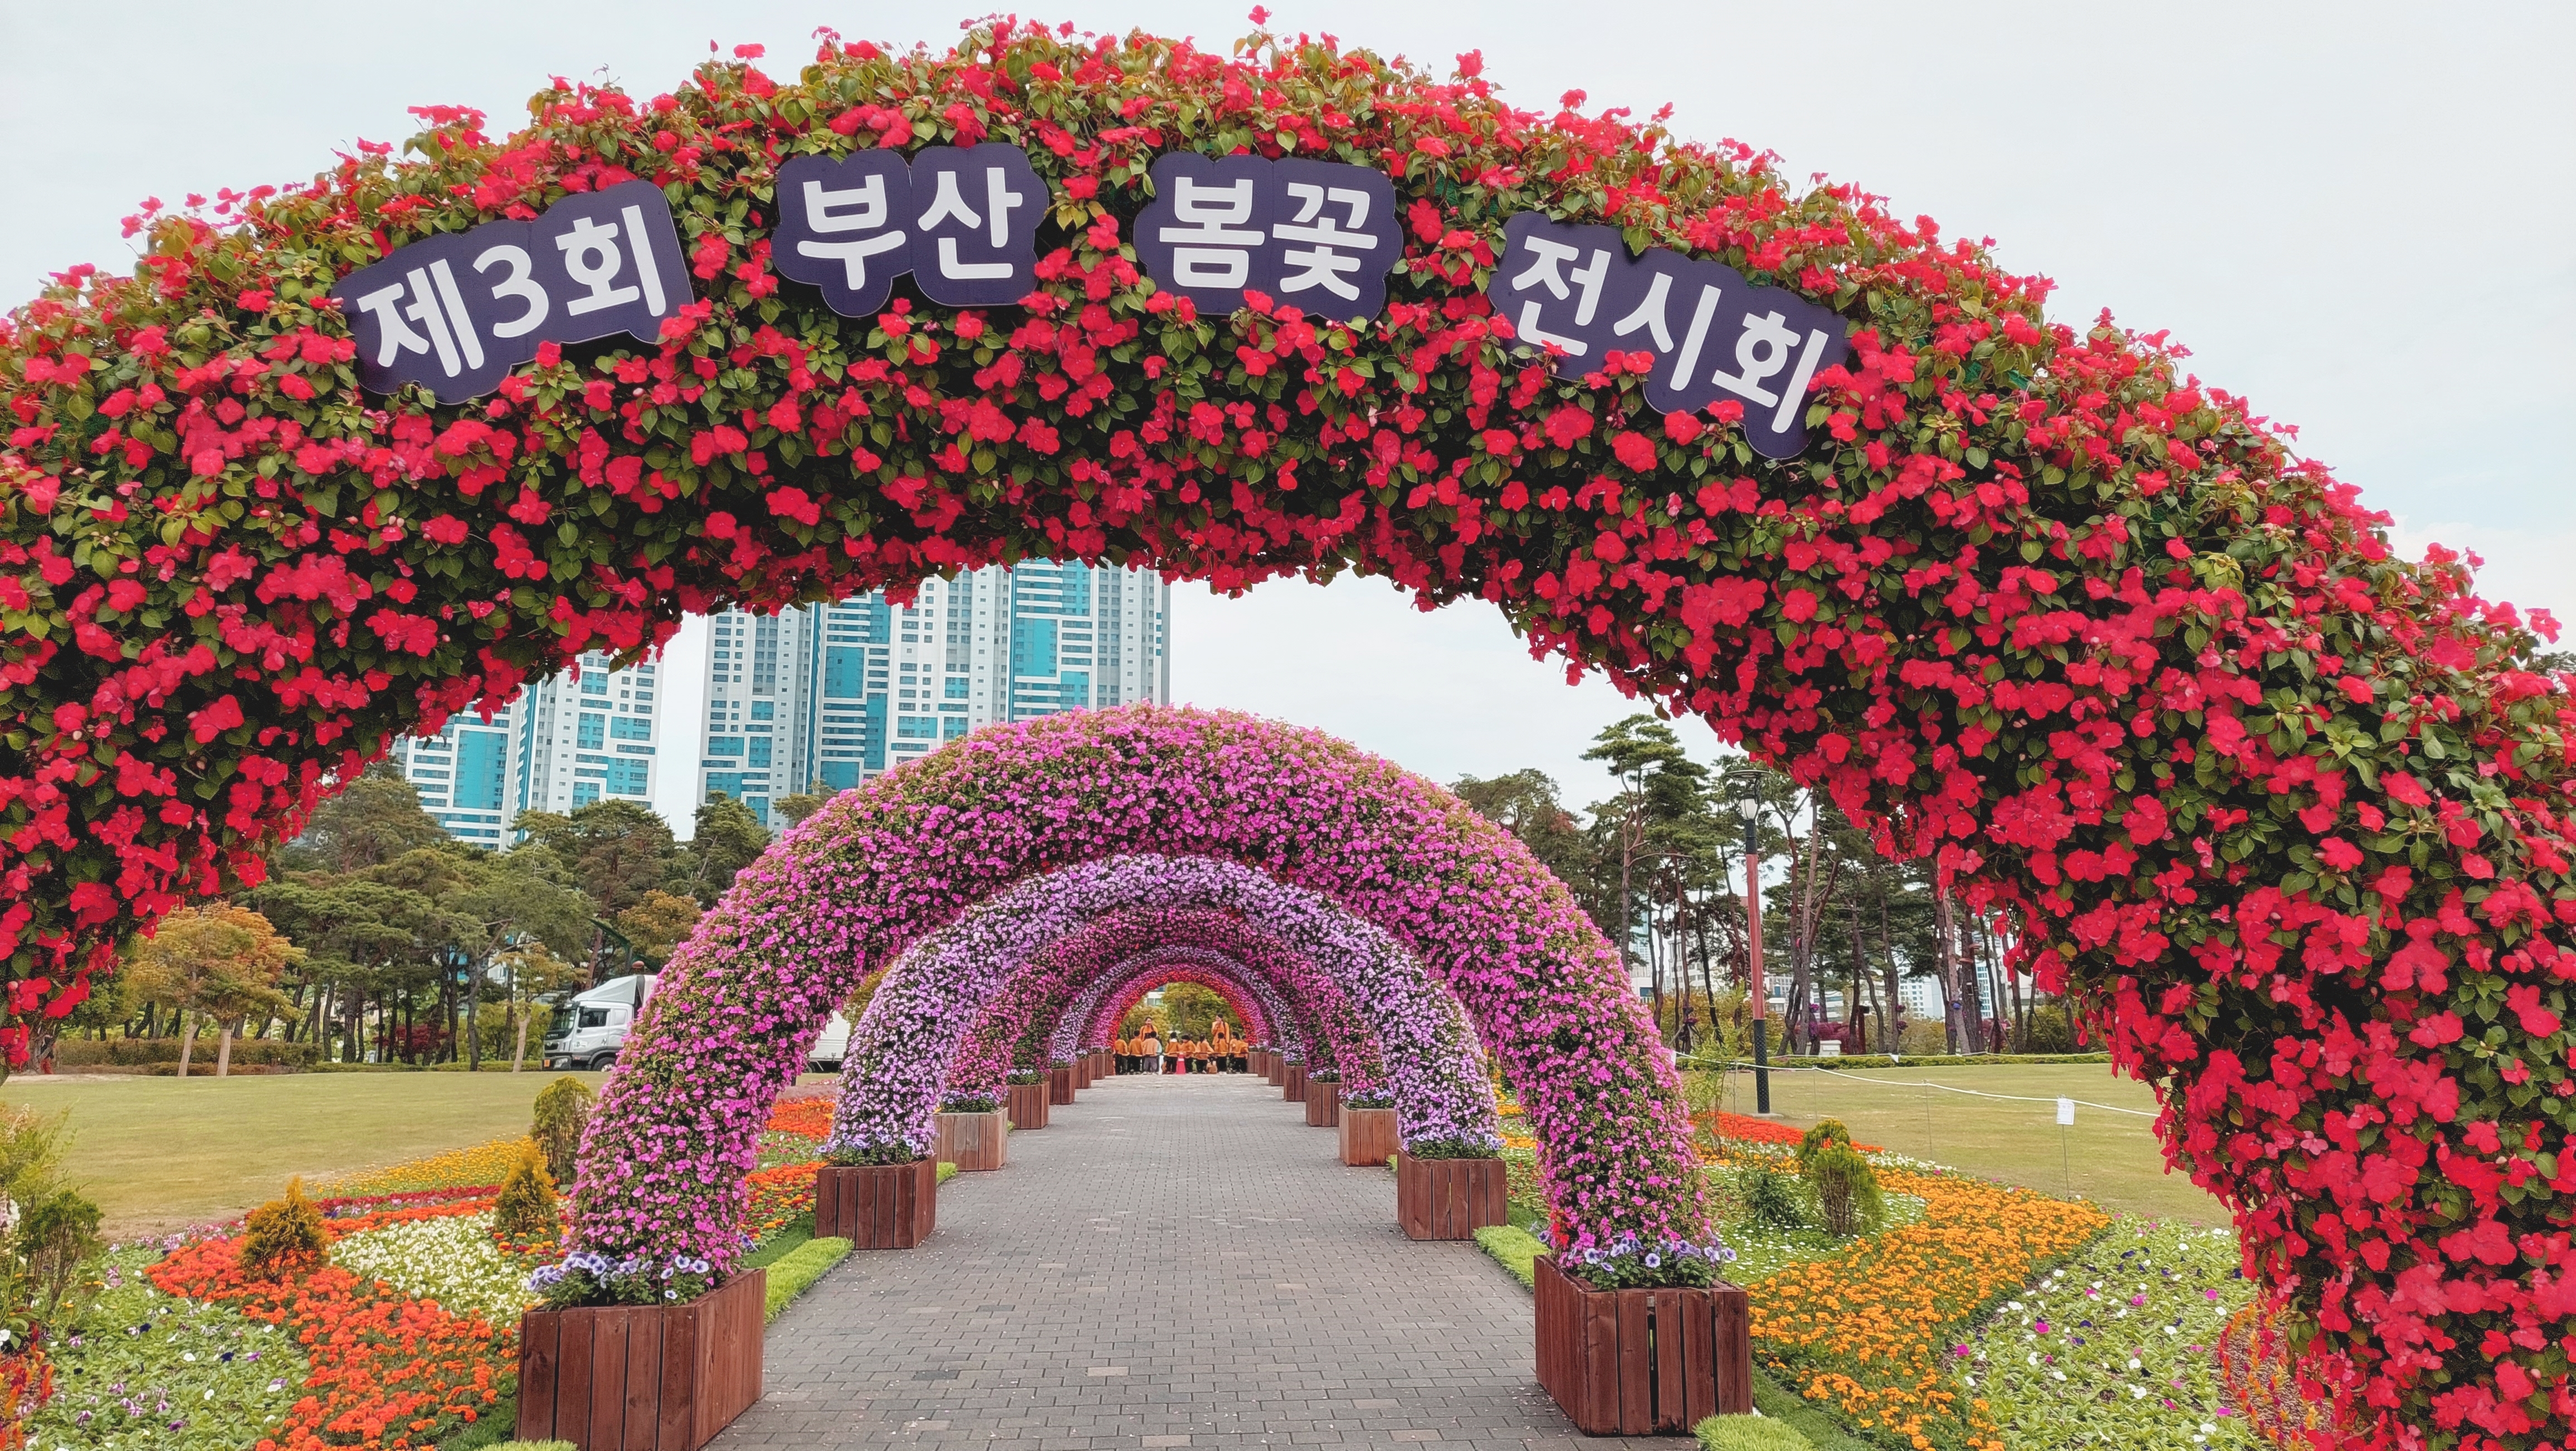 Flowers in full bloom at Busan Citizens Park